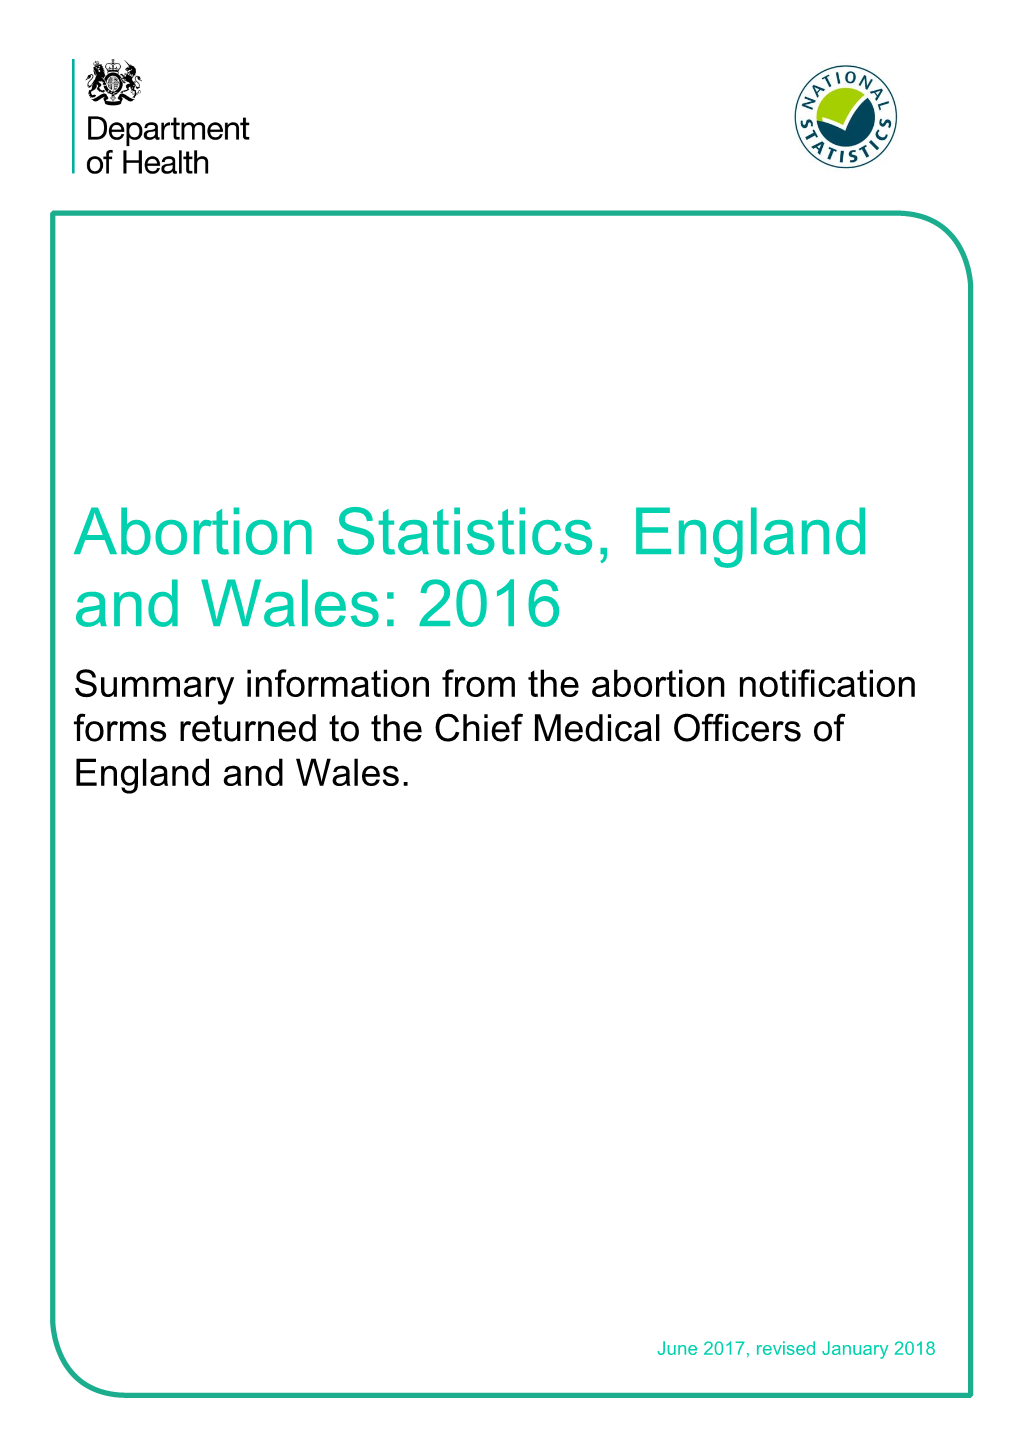 Abortion Statistics, England and Wales: 2016 Summary Information from the Abortion Notification Forms Returned to the Chief Medical Officers of England and Wales